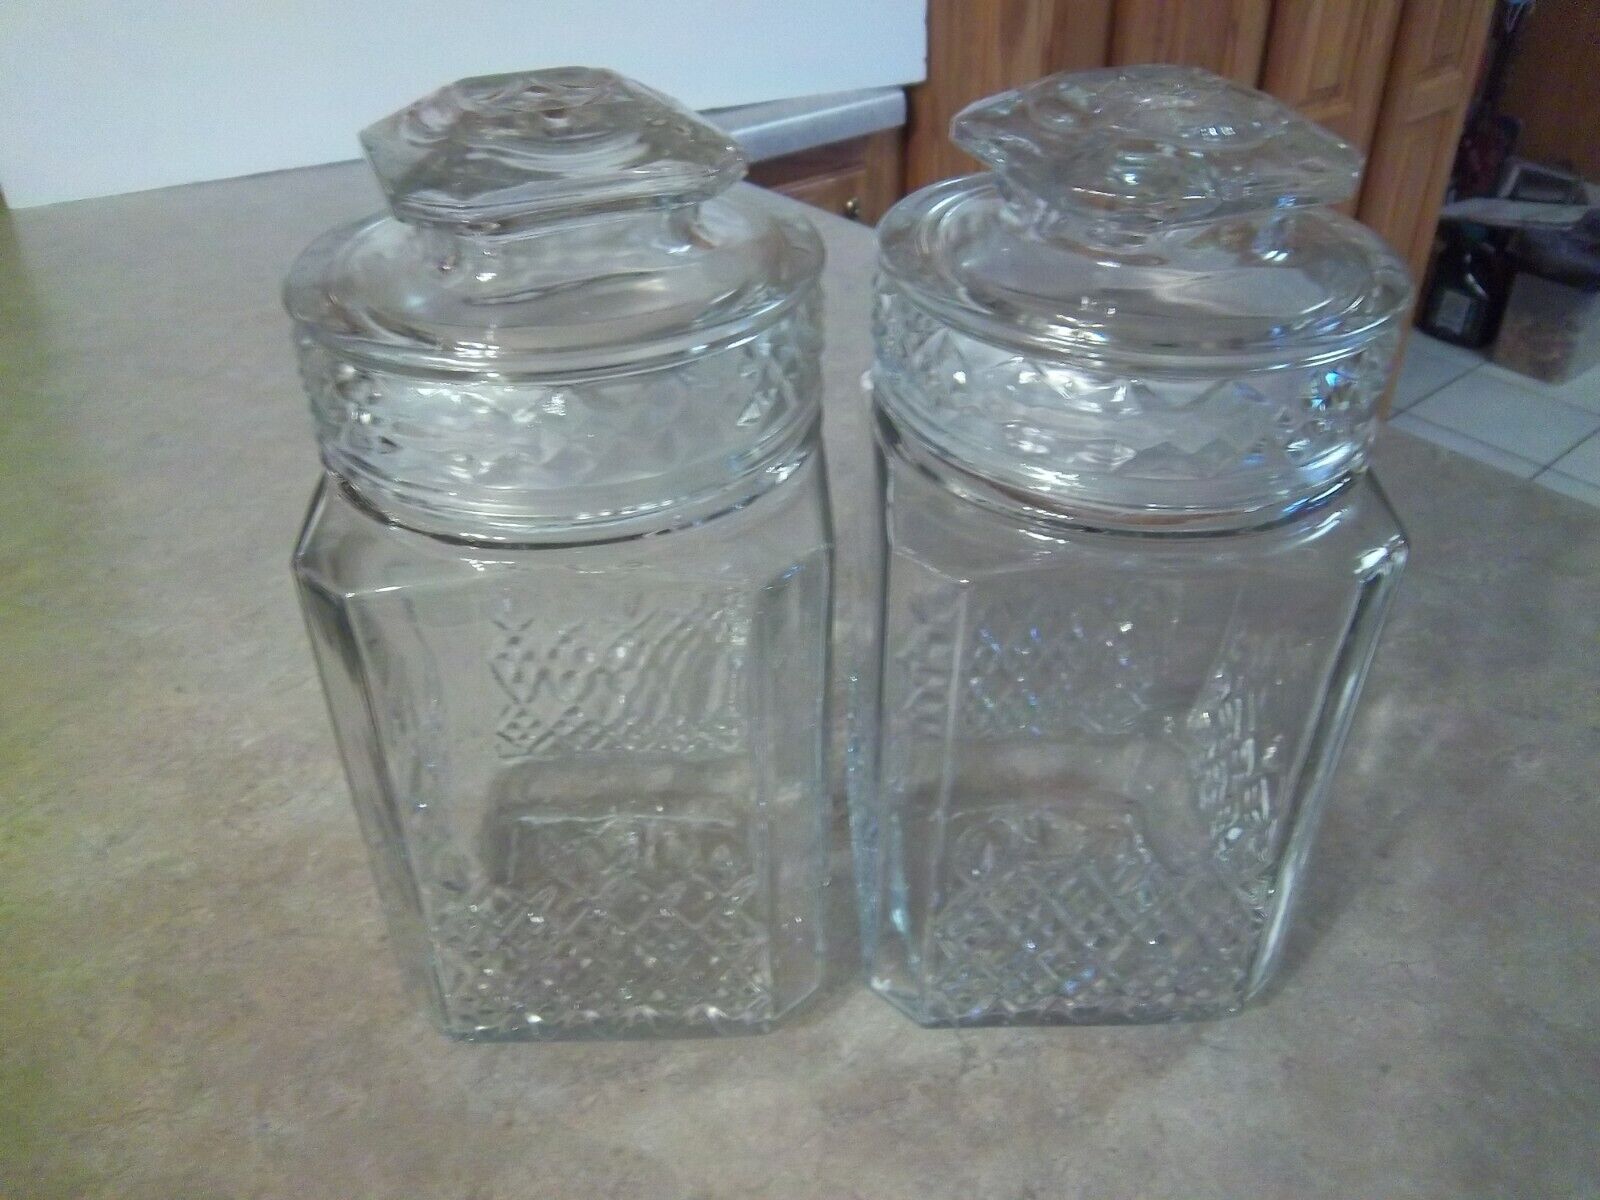 2 Vintage Koeze's 9 in. Glass Canister w/Lids - Kitchen Storage - Apothecary Jar